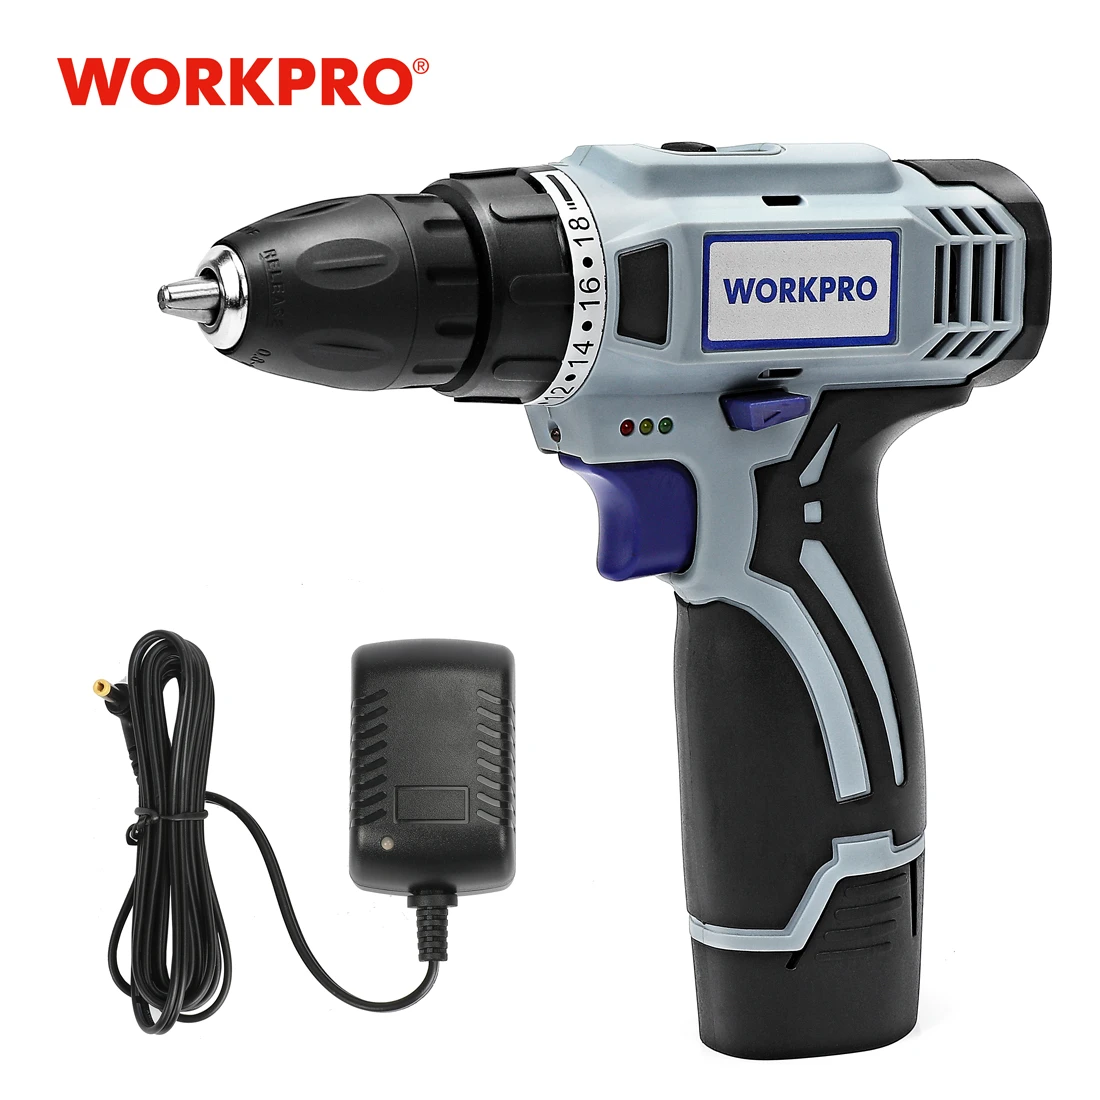 WORKPRO 12V Cordless Drill Electric Screwdriver Mini Wireless Power Driver DC Lithium-Ion Battery 3/8-Inch 2-Speed